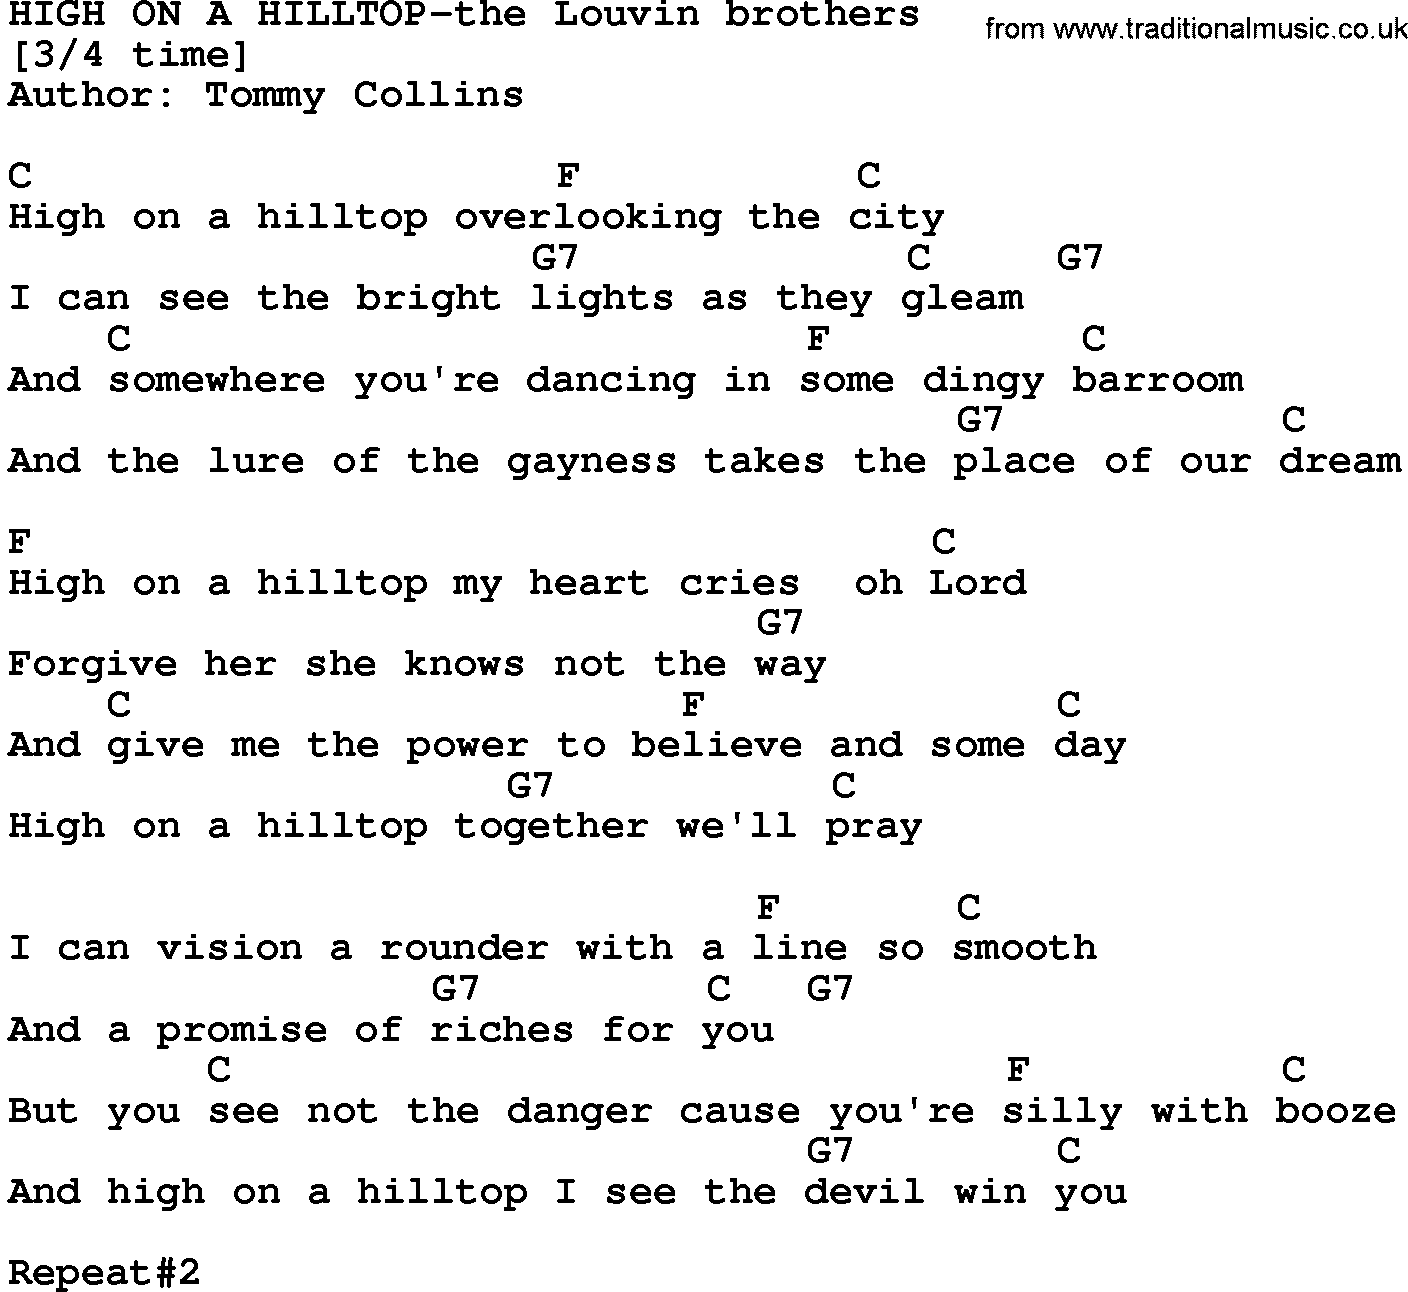 Country music song: High On A Hilltop-The Louvin Brothers lyrics and chords